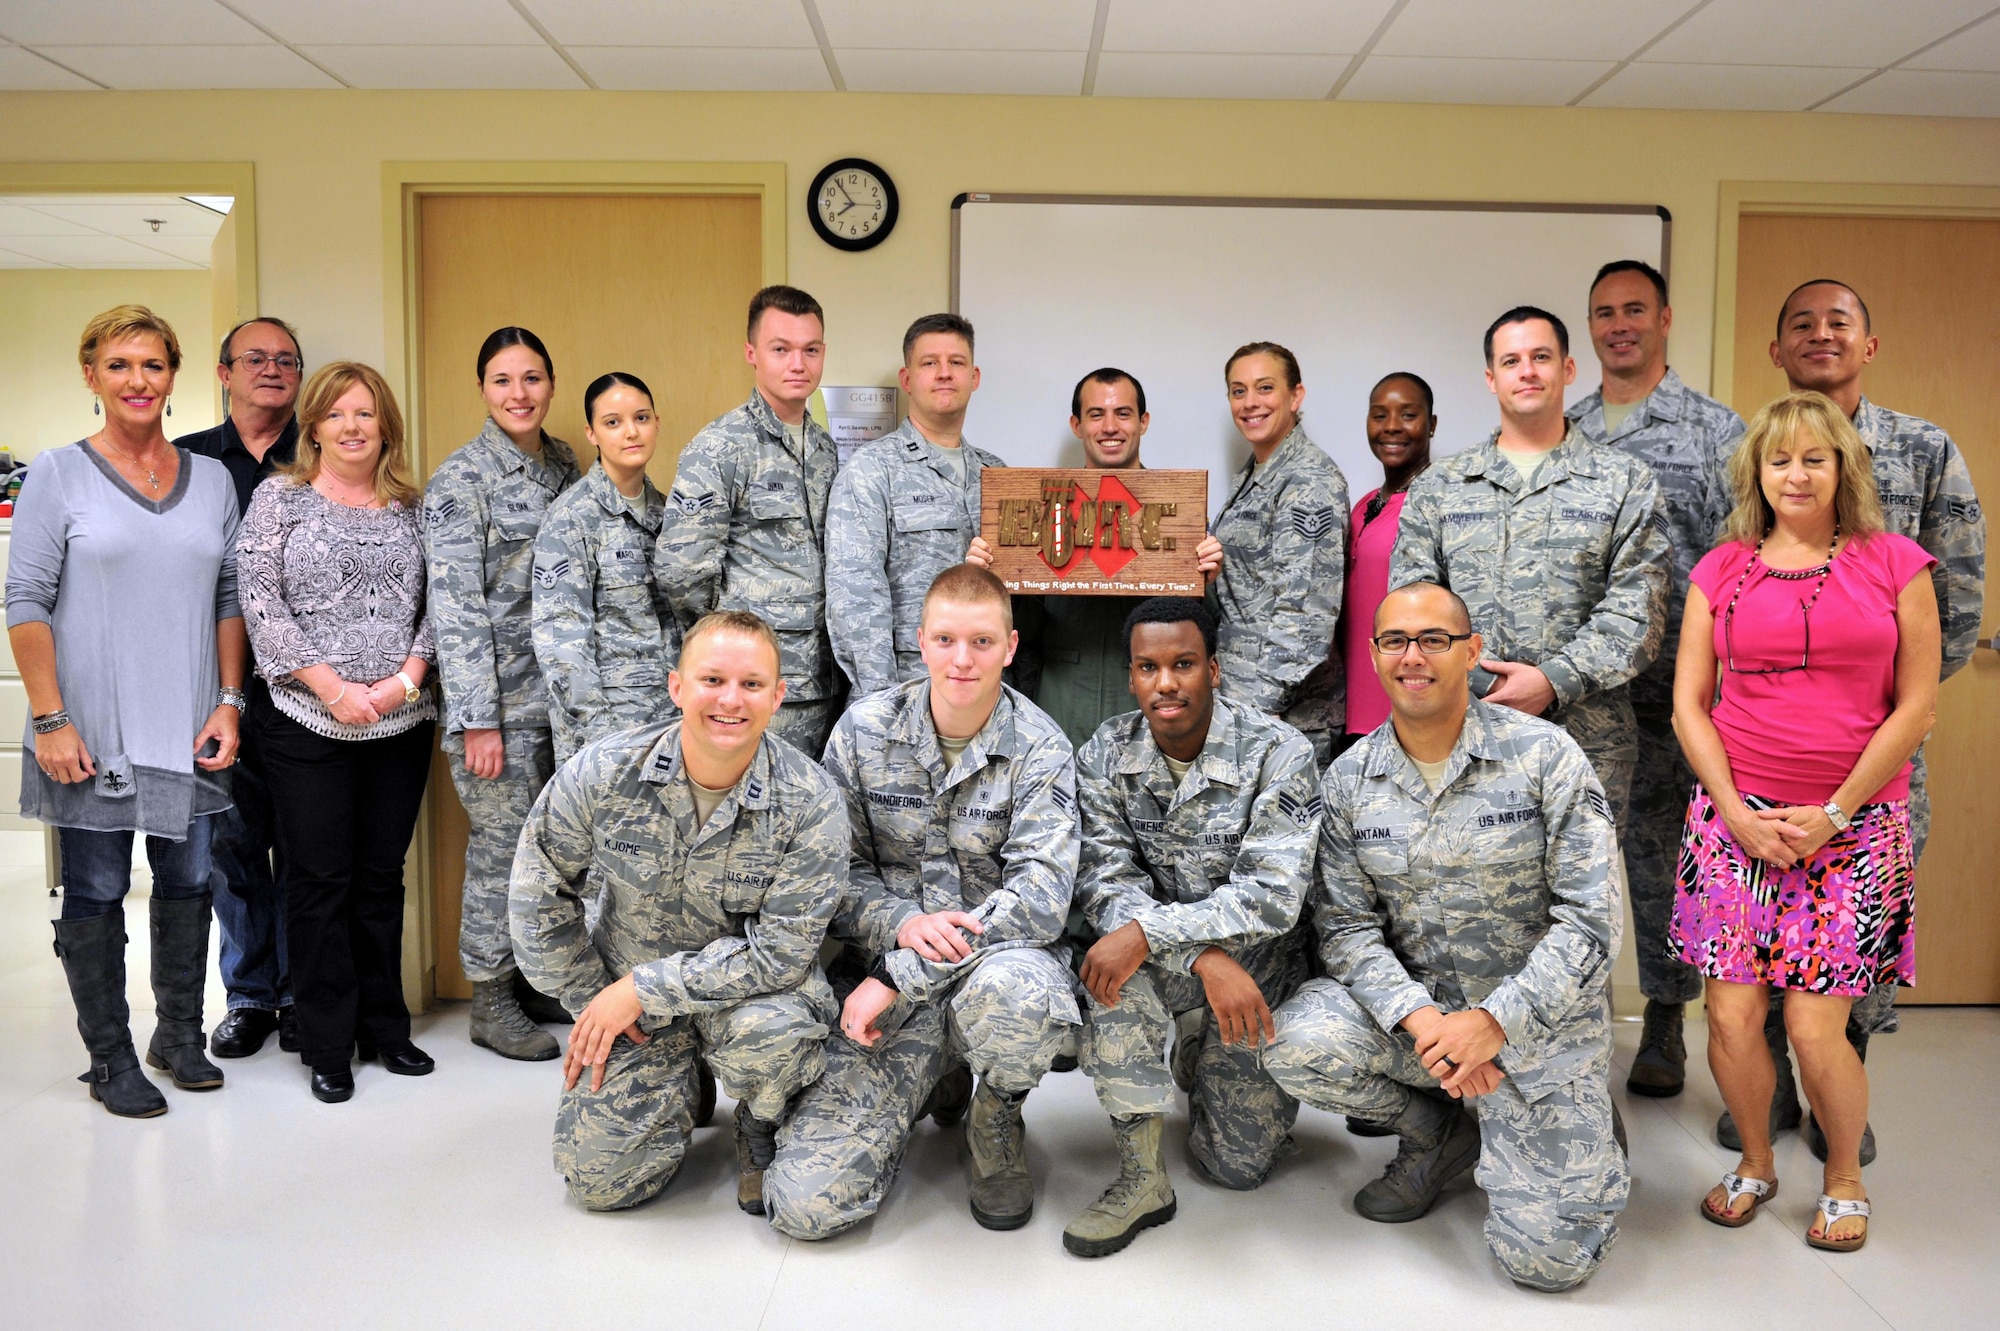 Members of the Base Operation Medicine Cell take a group photo after hosting a grand opening at the Keesler Medical Center, Sept. 28, 2015, Keesler Air Force Base, Miss. The Keesler BOMC is working to adjust Air Force healthcare by standardizing Public Health Assessments, Deployment Health Assessments, flight physicals and clearance physicals in order to make direct patient care more accessible, personal and timely. This clinic is the first of its kind in the Air Force. (U.S. Air Force photo by Airman 1st Class Duncan McElroy)